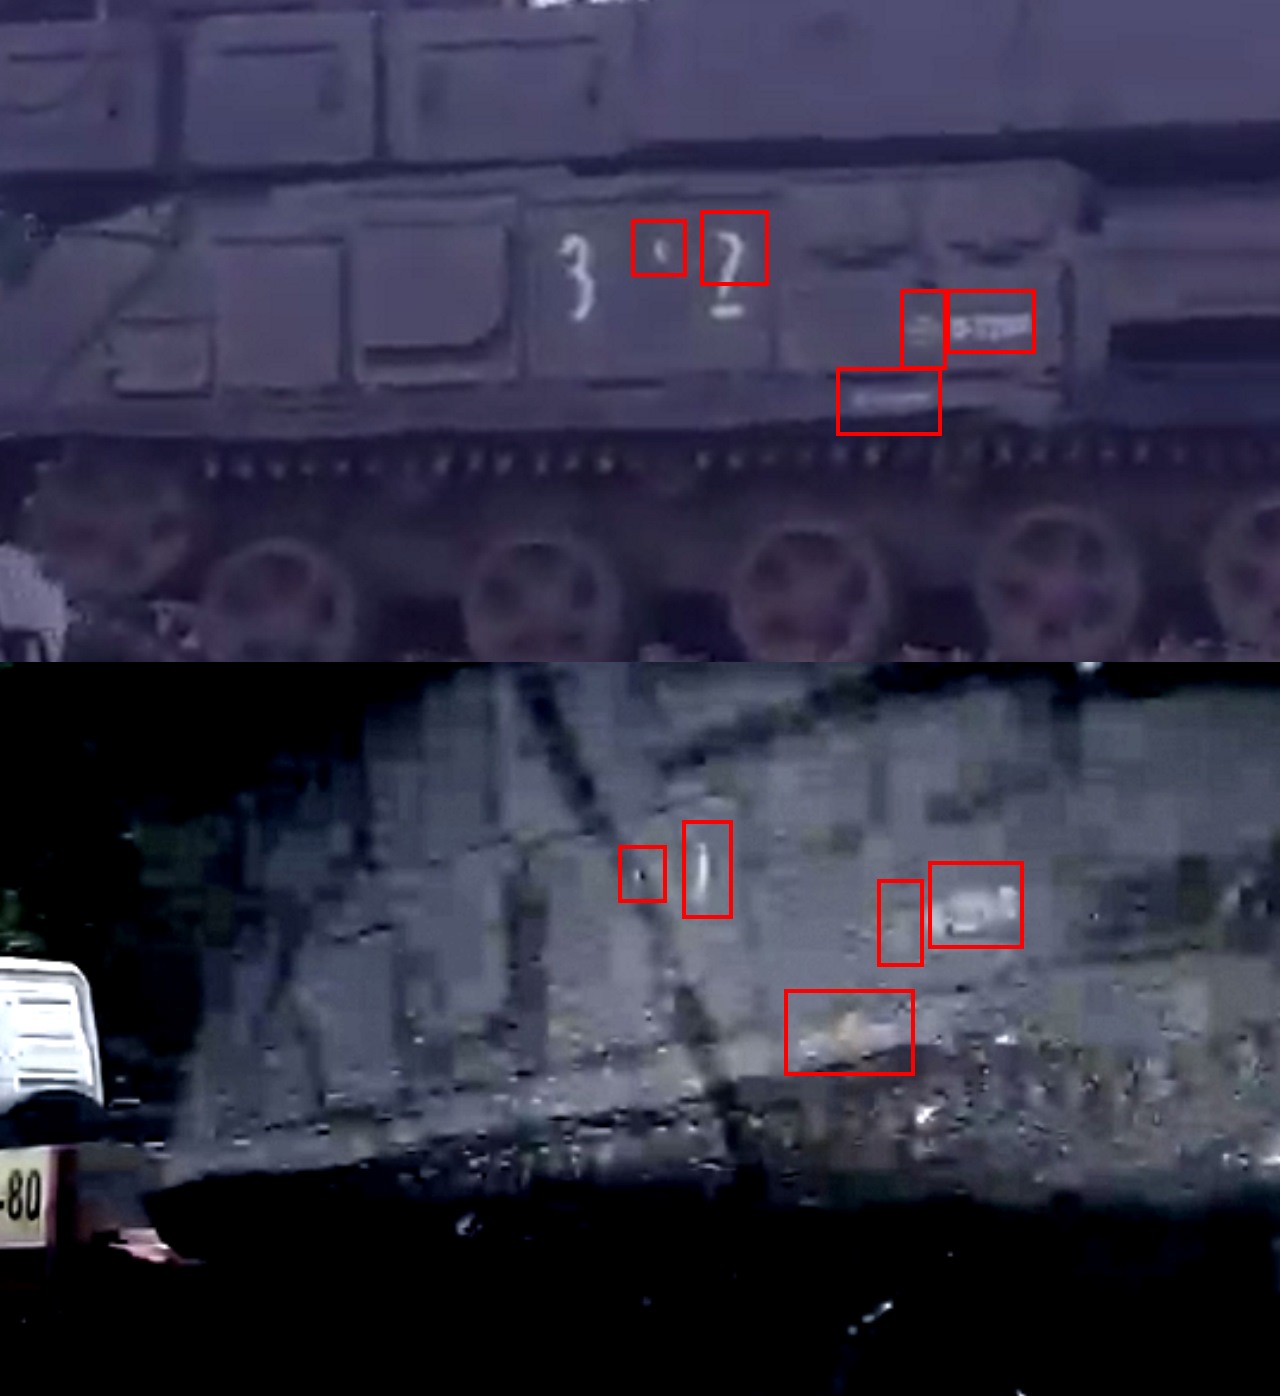 The top still is from footage of the convoy in Russia, the bottom from the Paris Match photograph [Source] with the matching markings highlighted